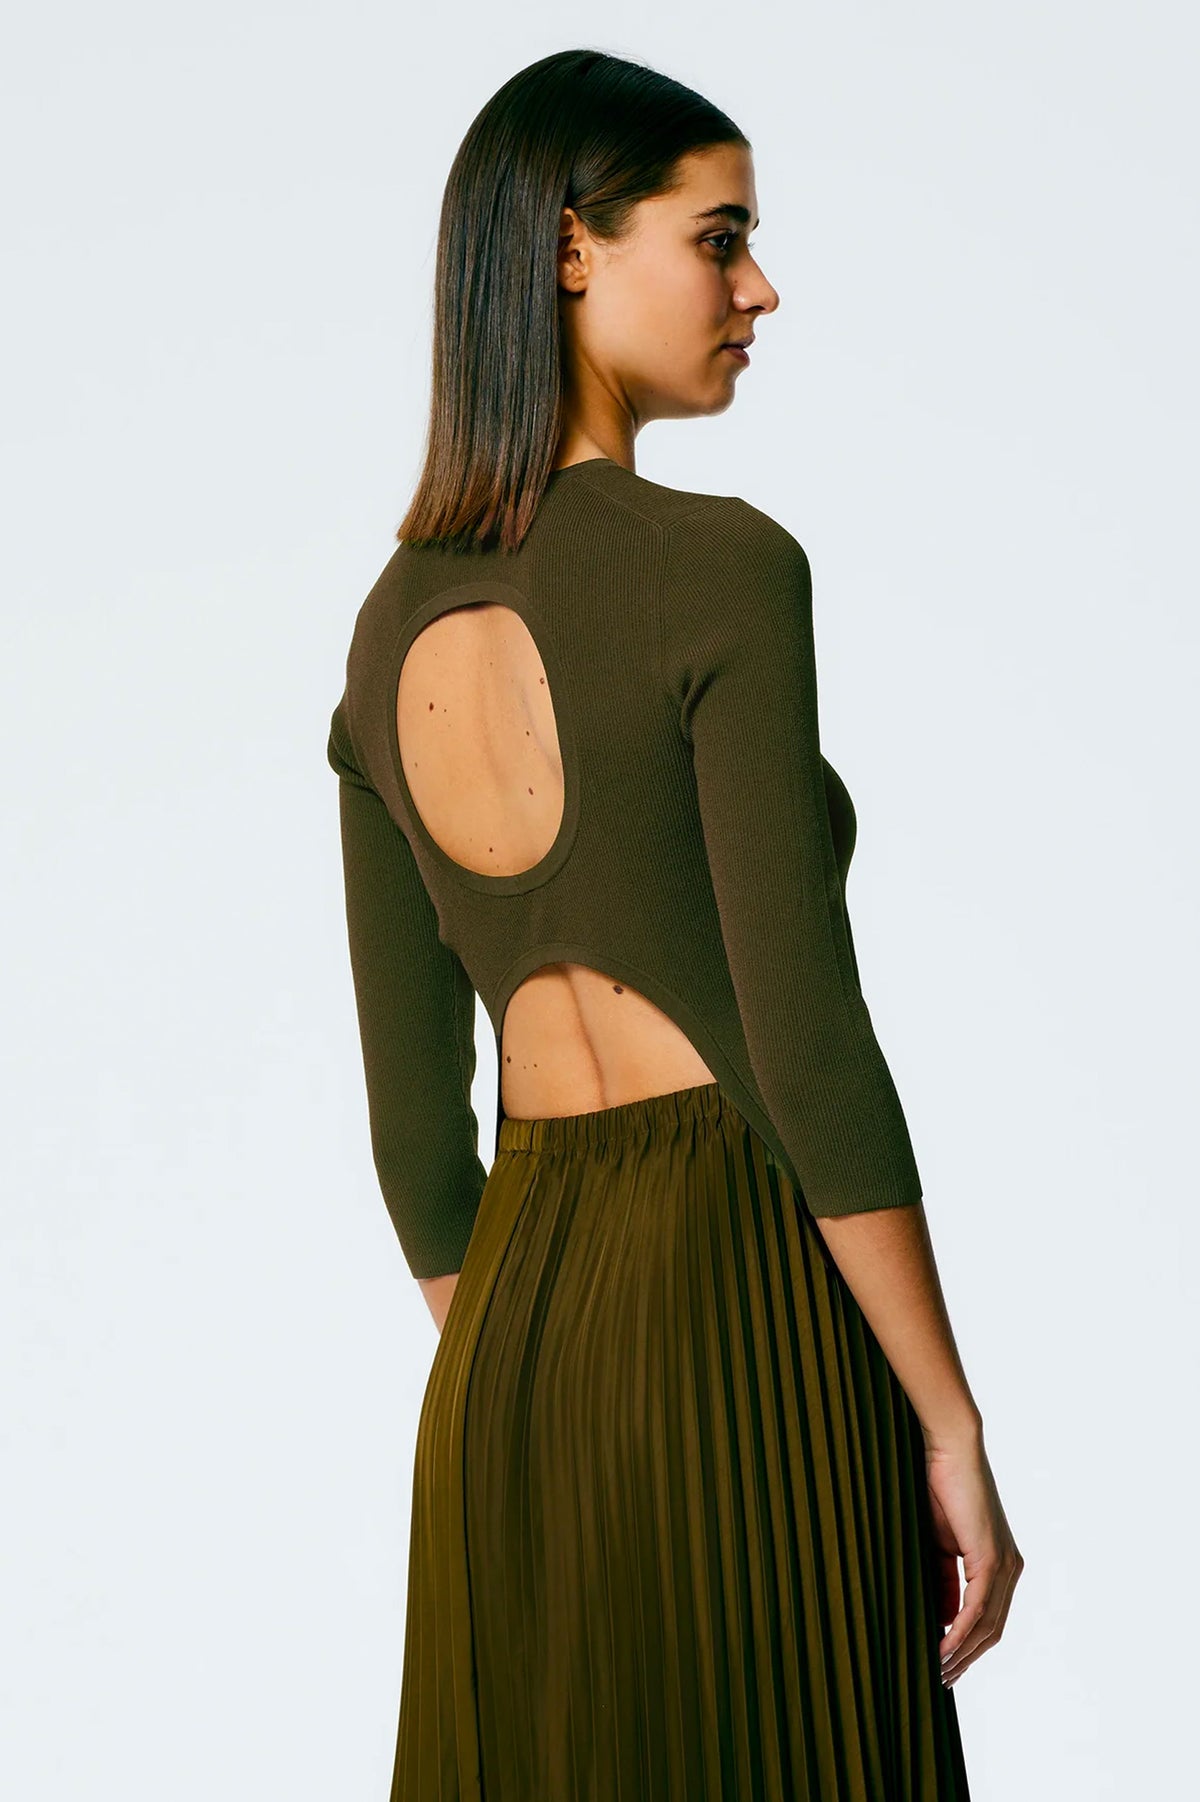 Giselle Openback Stretch Sweater in Wood